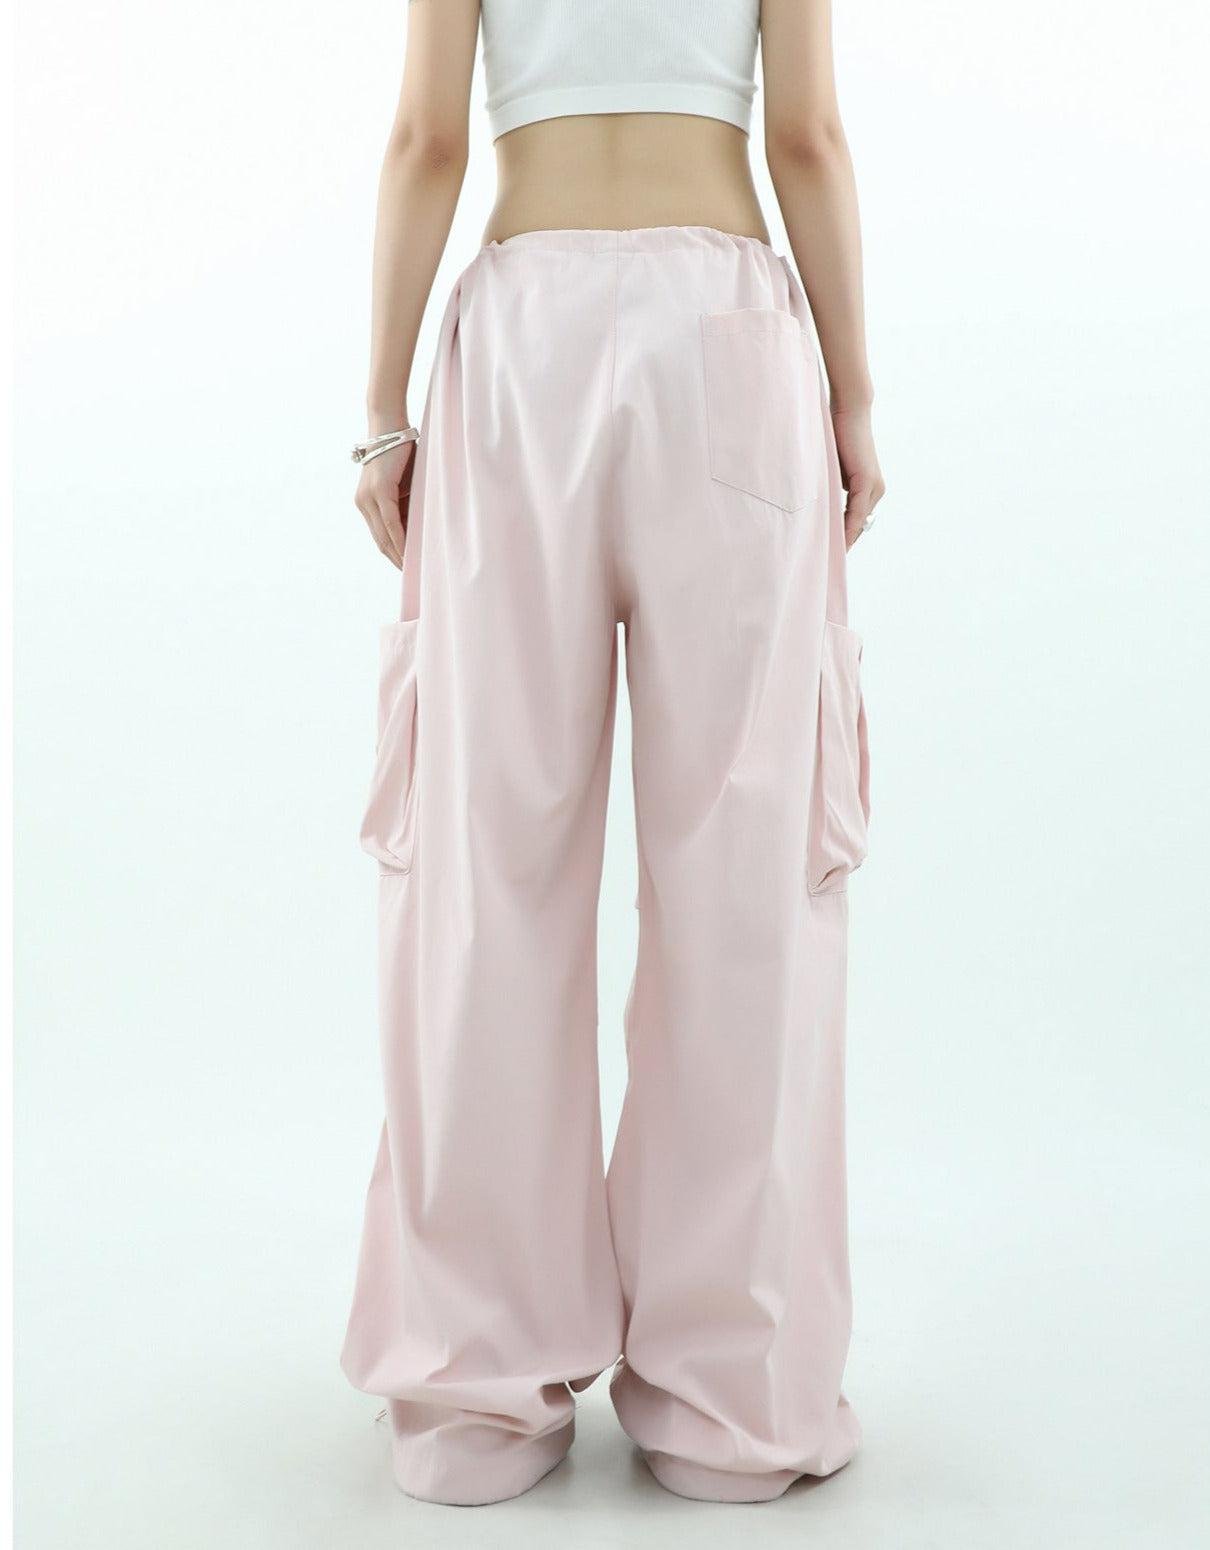 Star Buttoned Loose Cargo Pants Korean Street Fashion Pants By Mr Nearly Shop Online at OH Vault